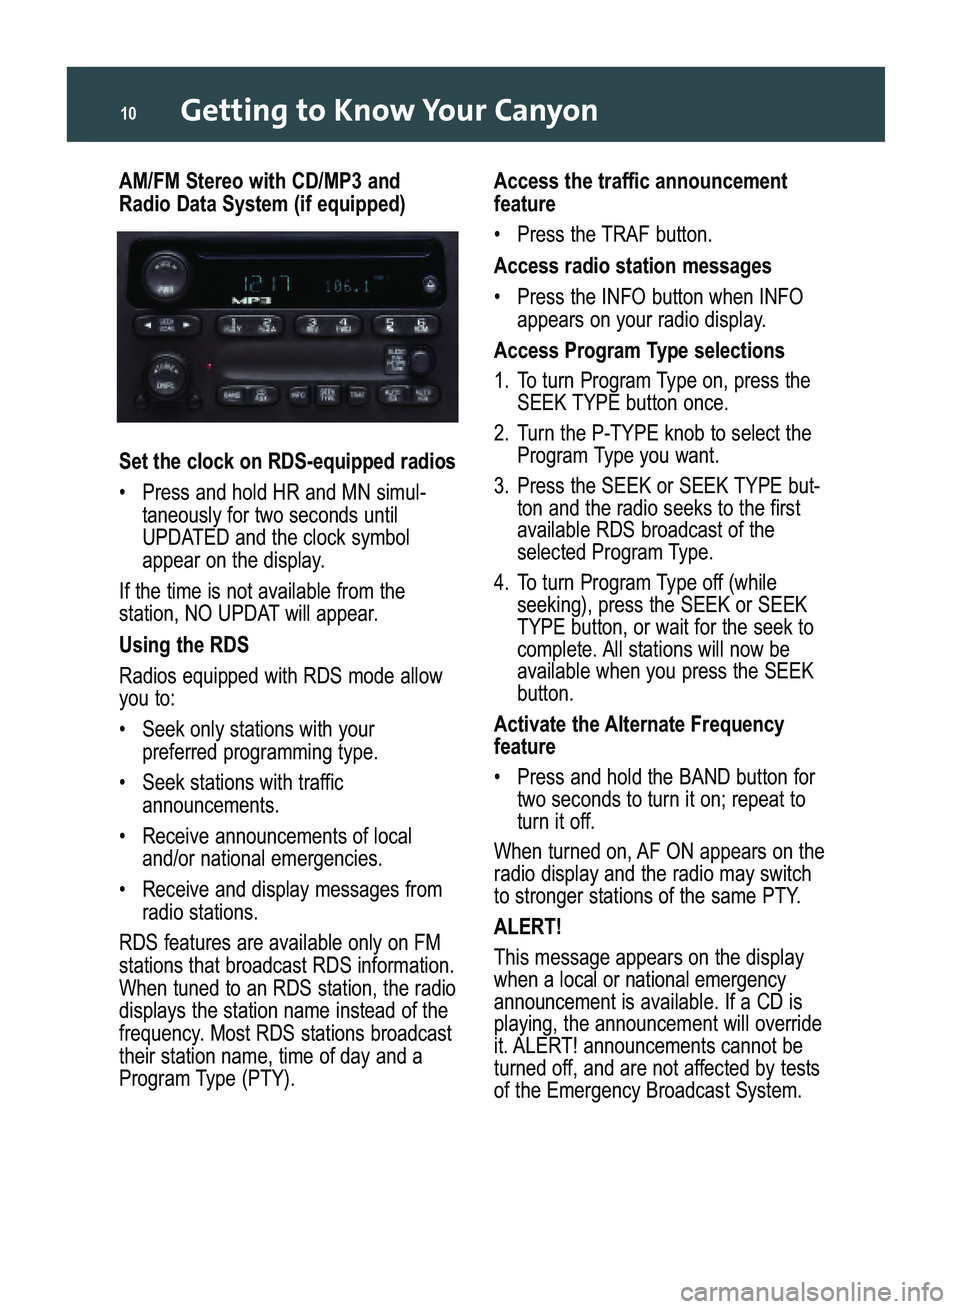 GMC CANYON 2008  Get To Know Guide Getting to Know Your Canyon10
AM/FM Stereo with CD/MP3 and
Radio Data System (if equipped)
Set the clock on RDS�equipped radios
• Press and hold HR and MN simul�
taneously for two seconds until
UPDA